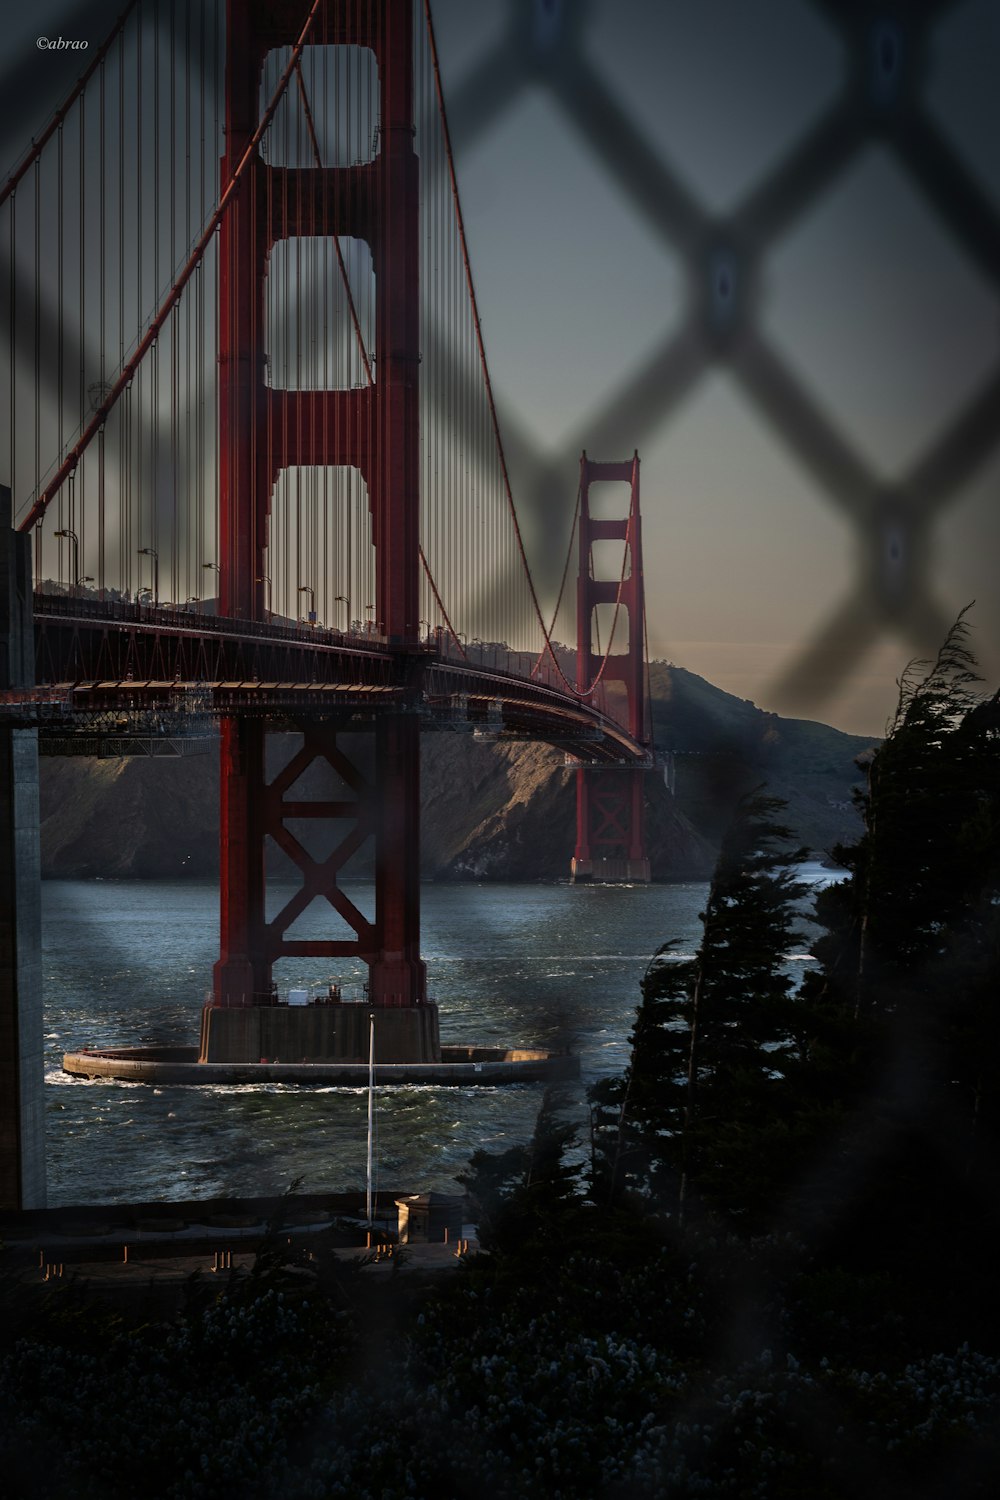 a view of the golden gate bridge through a chain link fence